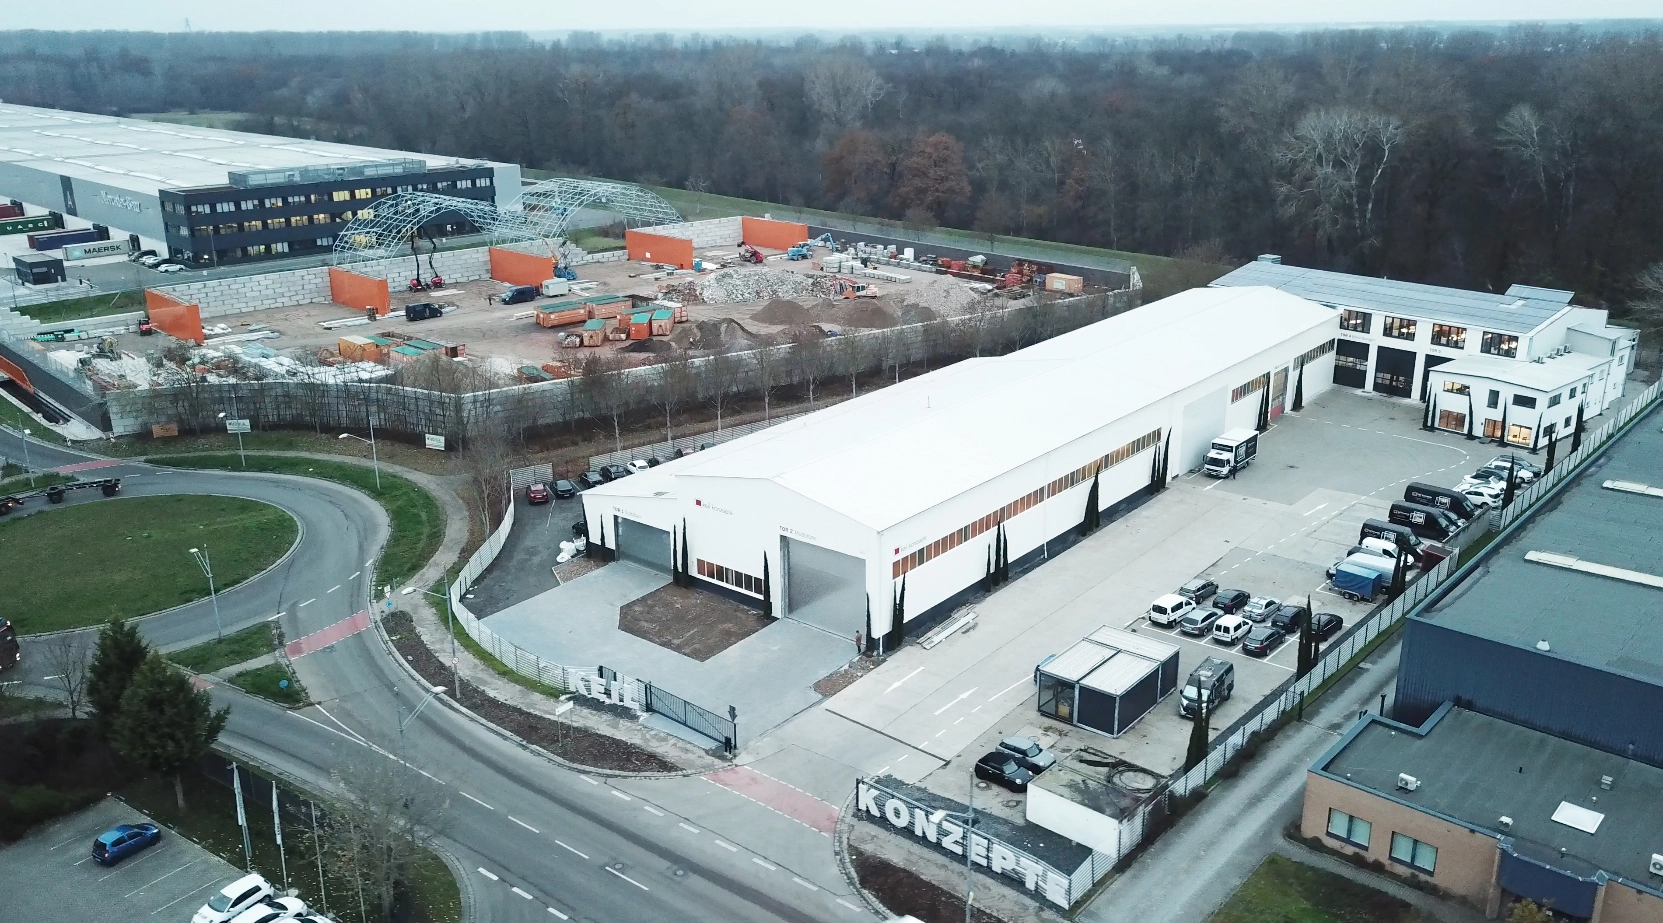 After one year of reconstruction, the whole company moves from Ludwigshafen Rheingönhein to Speyer to the new company headquarters. Here 10.000 sqm area, more than 6000 sqm hall area and 1500 sqm office and meeting rooms are available